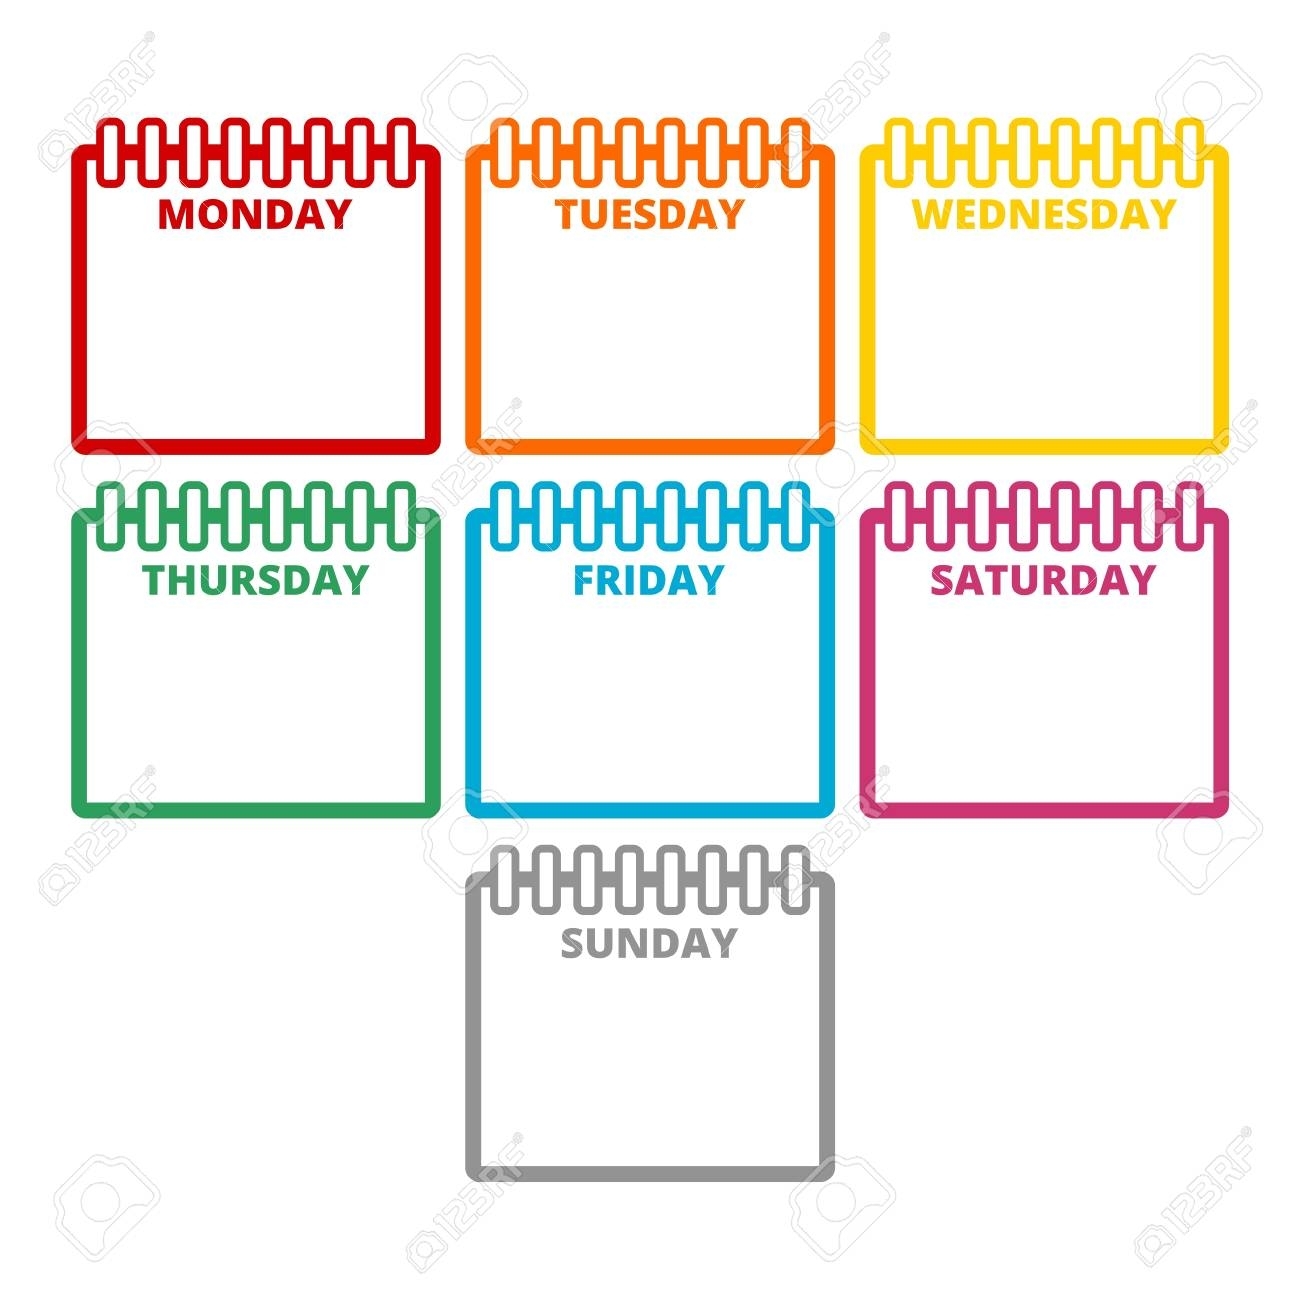 Days Of The Week, Calendar Sheets With The Days Of The Week